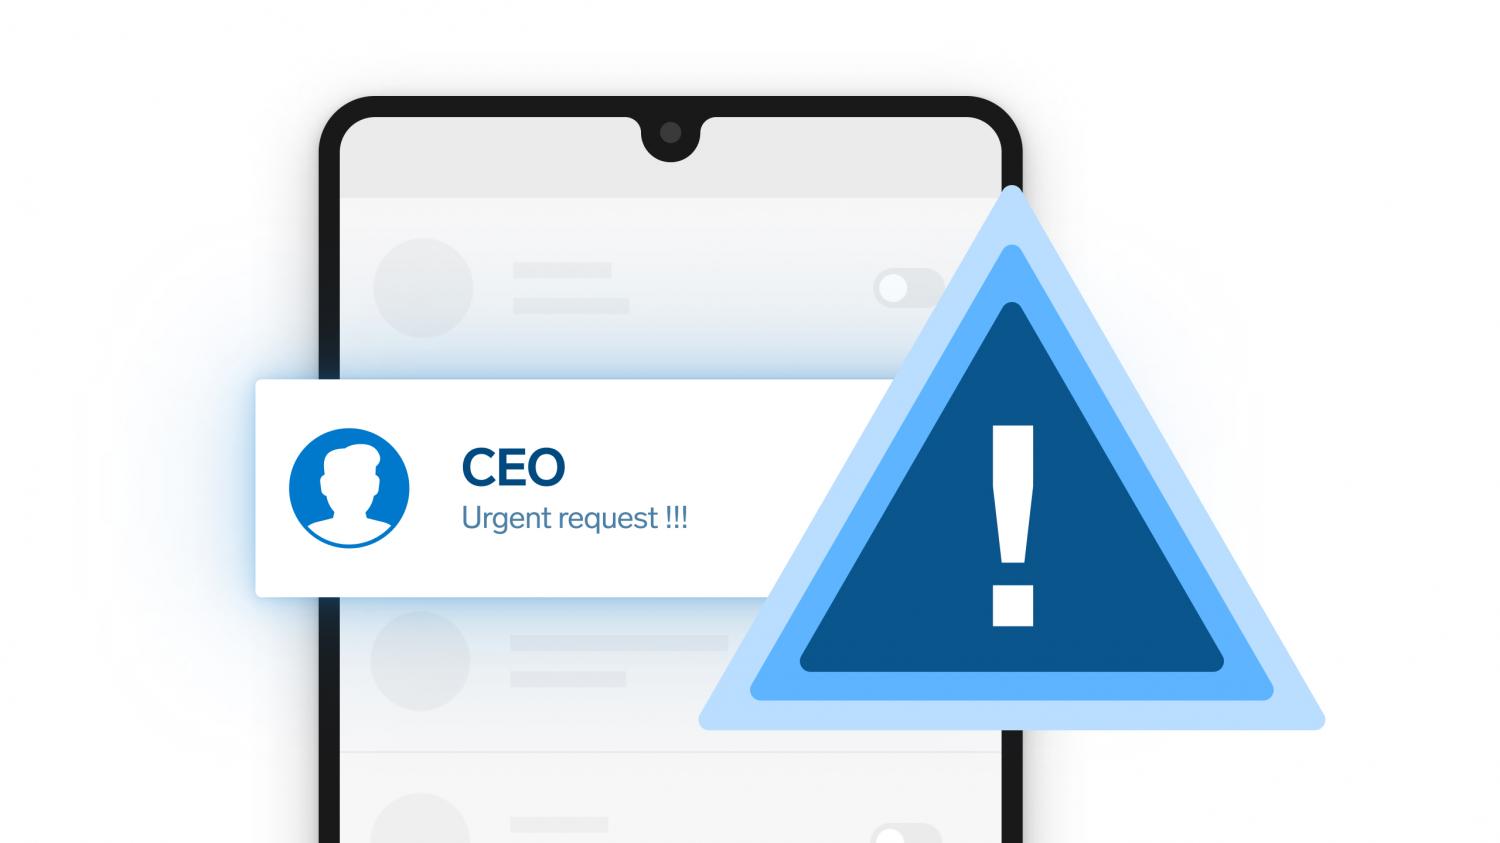 CEO Fraud via Messenger: Learn How to Protect Your Company